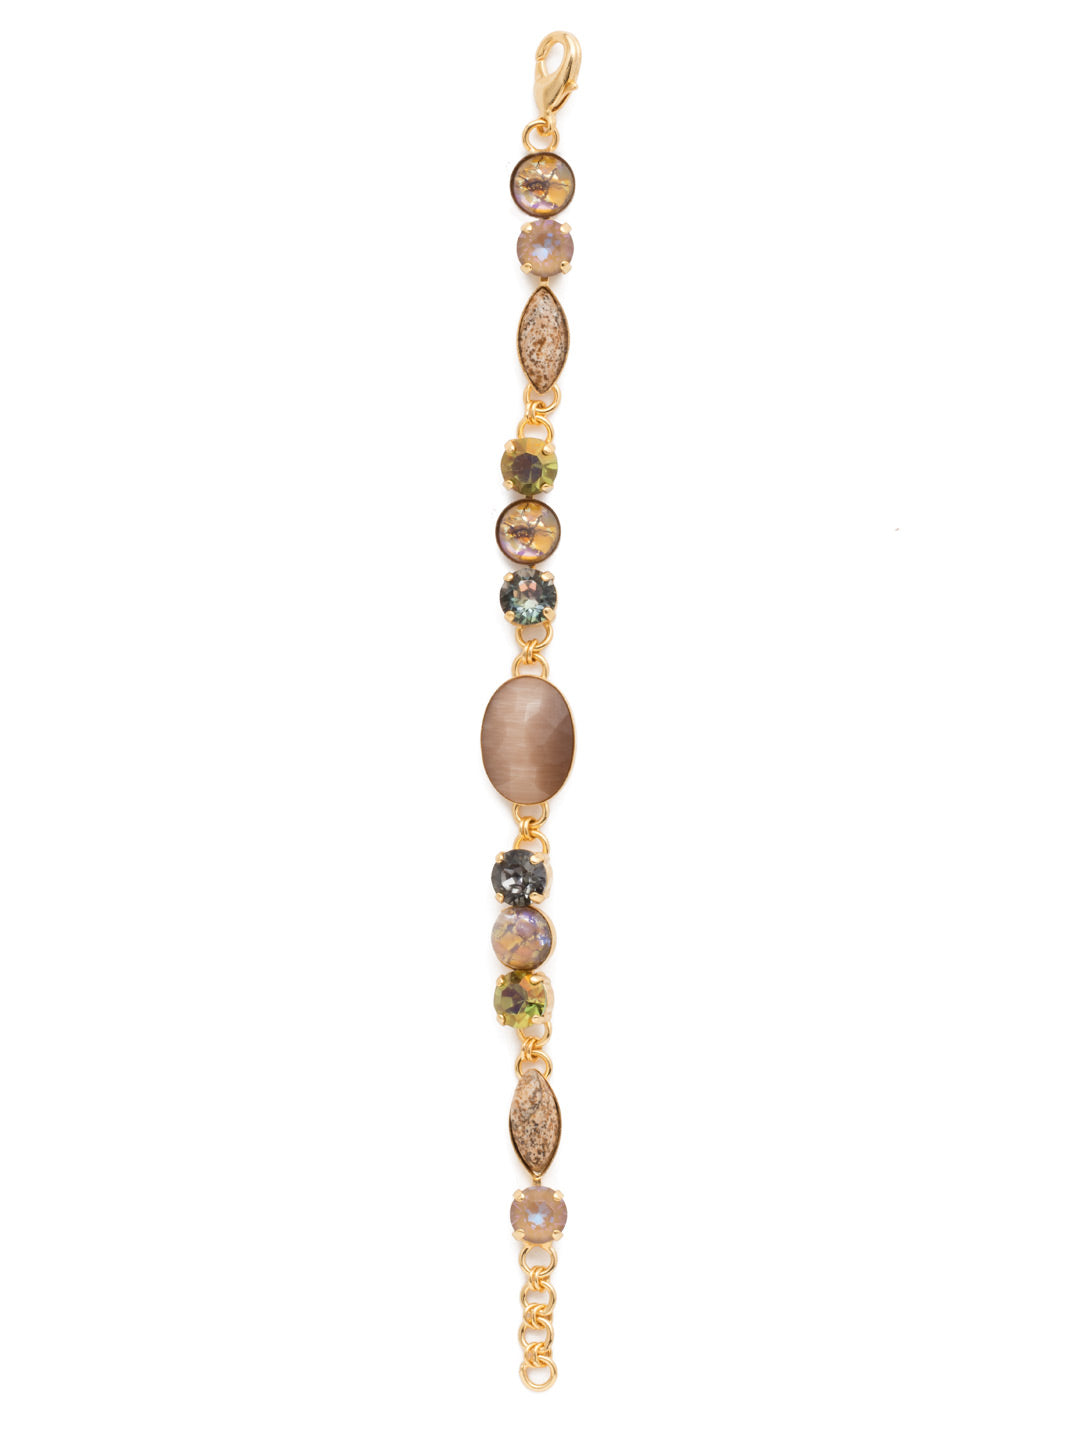 Astro Tennis Bracelet - BET4BGCSM - Our Astro Tennis Bracelet offers a healthy mix of stylish features with classic Sorrelli crystals in round and navette shapes, set off by a center stone with an earthy feel. From Sorrelli's Cashmere collection in our Bright Gold-tone finish.